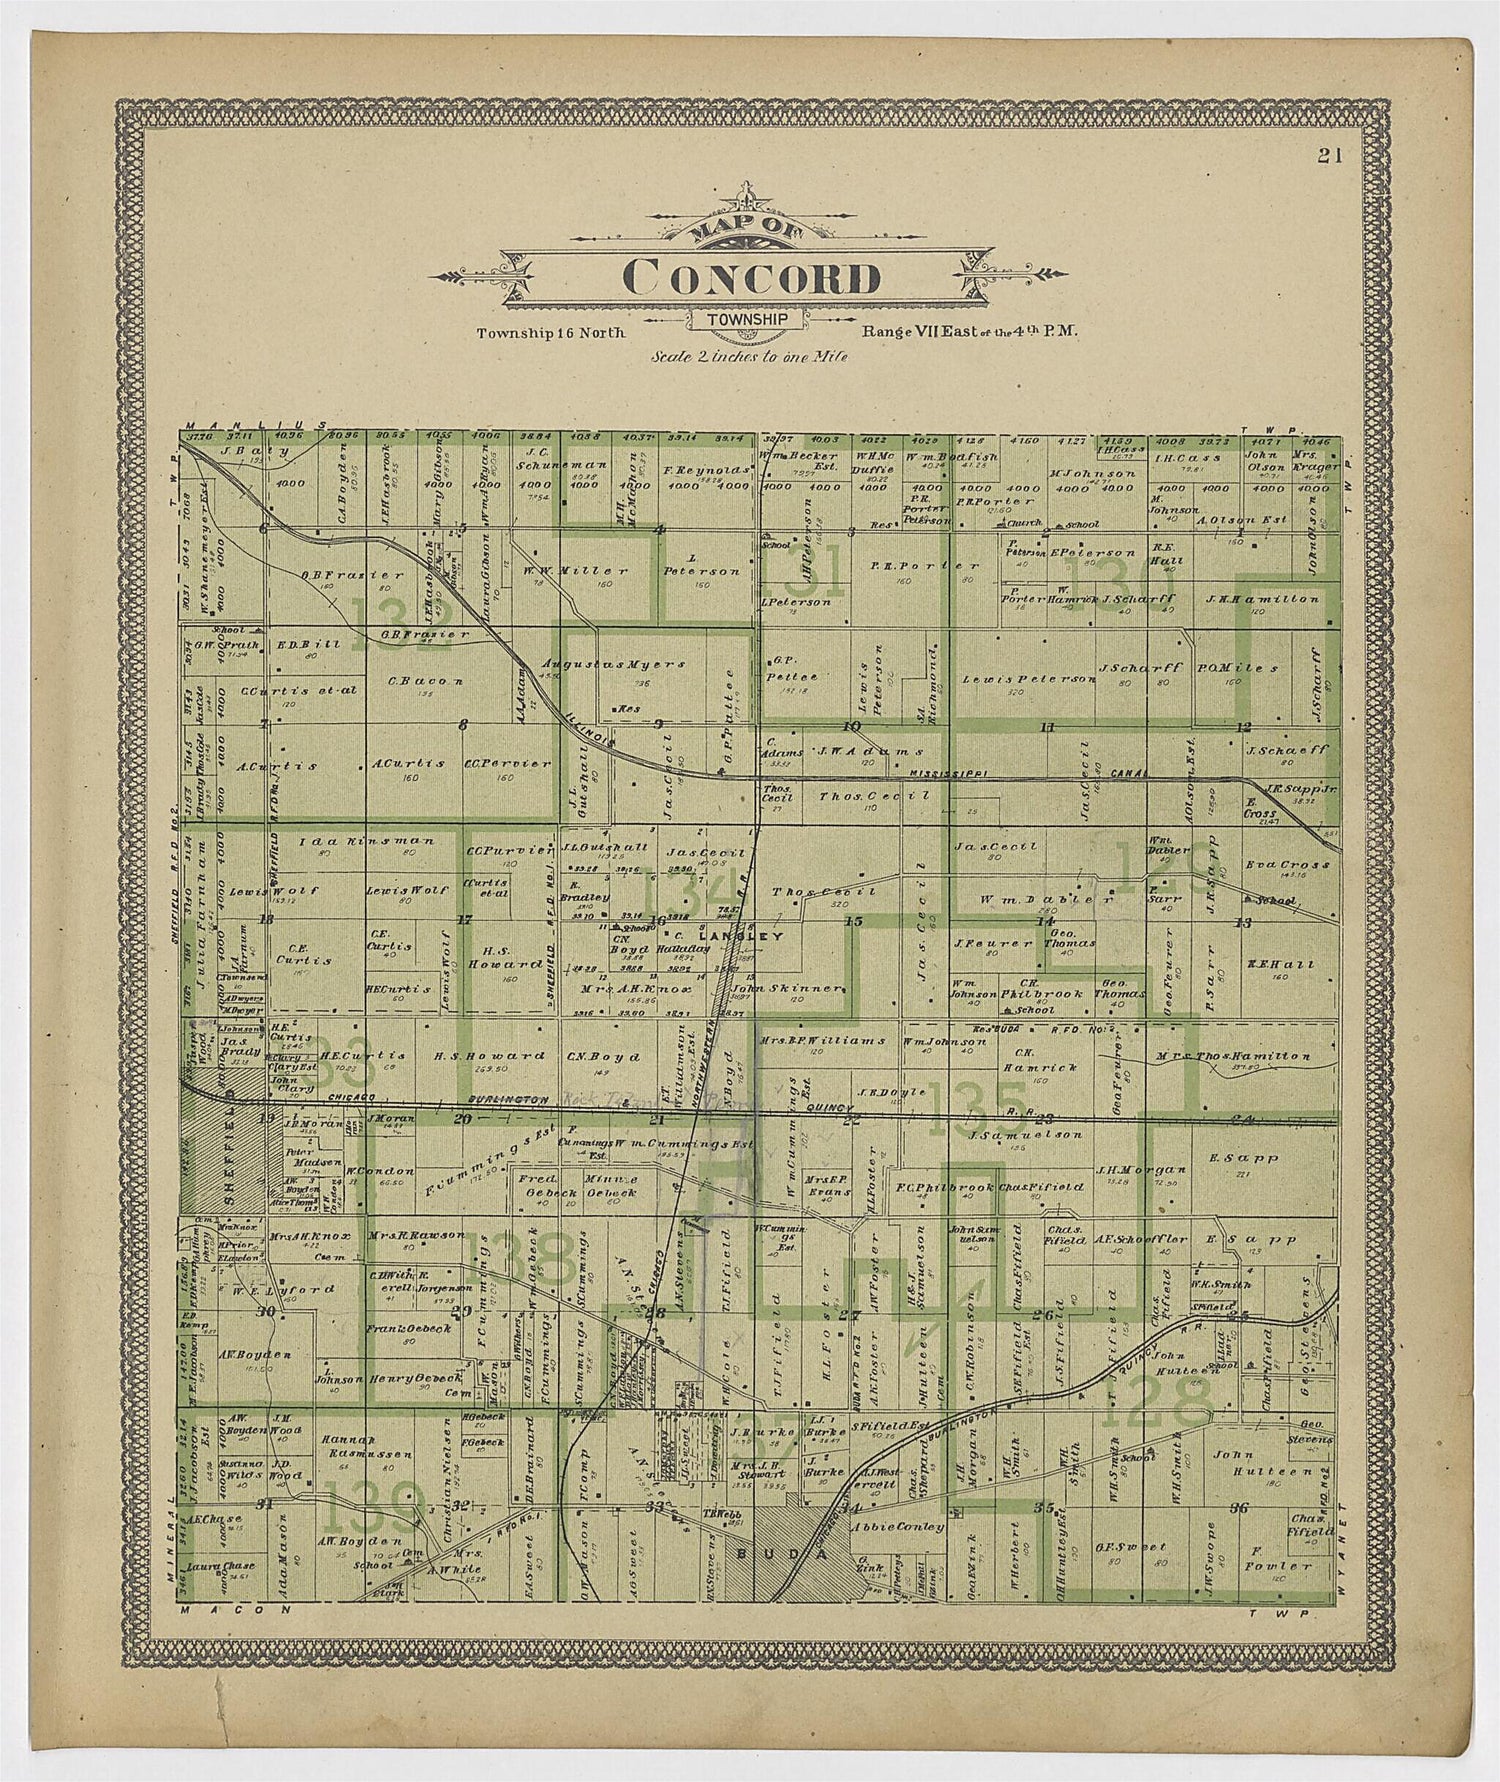 This old map of Image 12 of 20th Century Atlas of Bureau County, Illinois from Atlas of Bureau County, Illinois from 1905 was created by  Middle-West Publishing Co in 1905